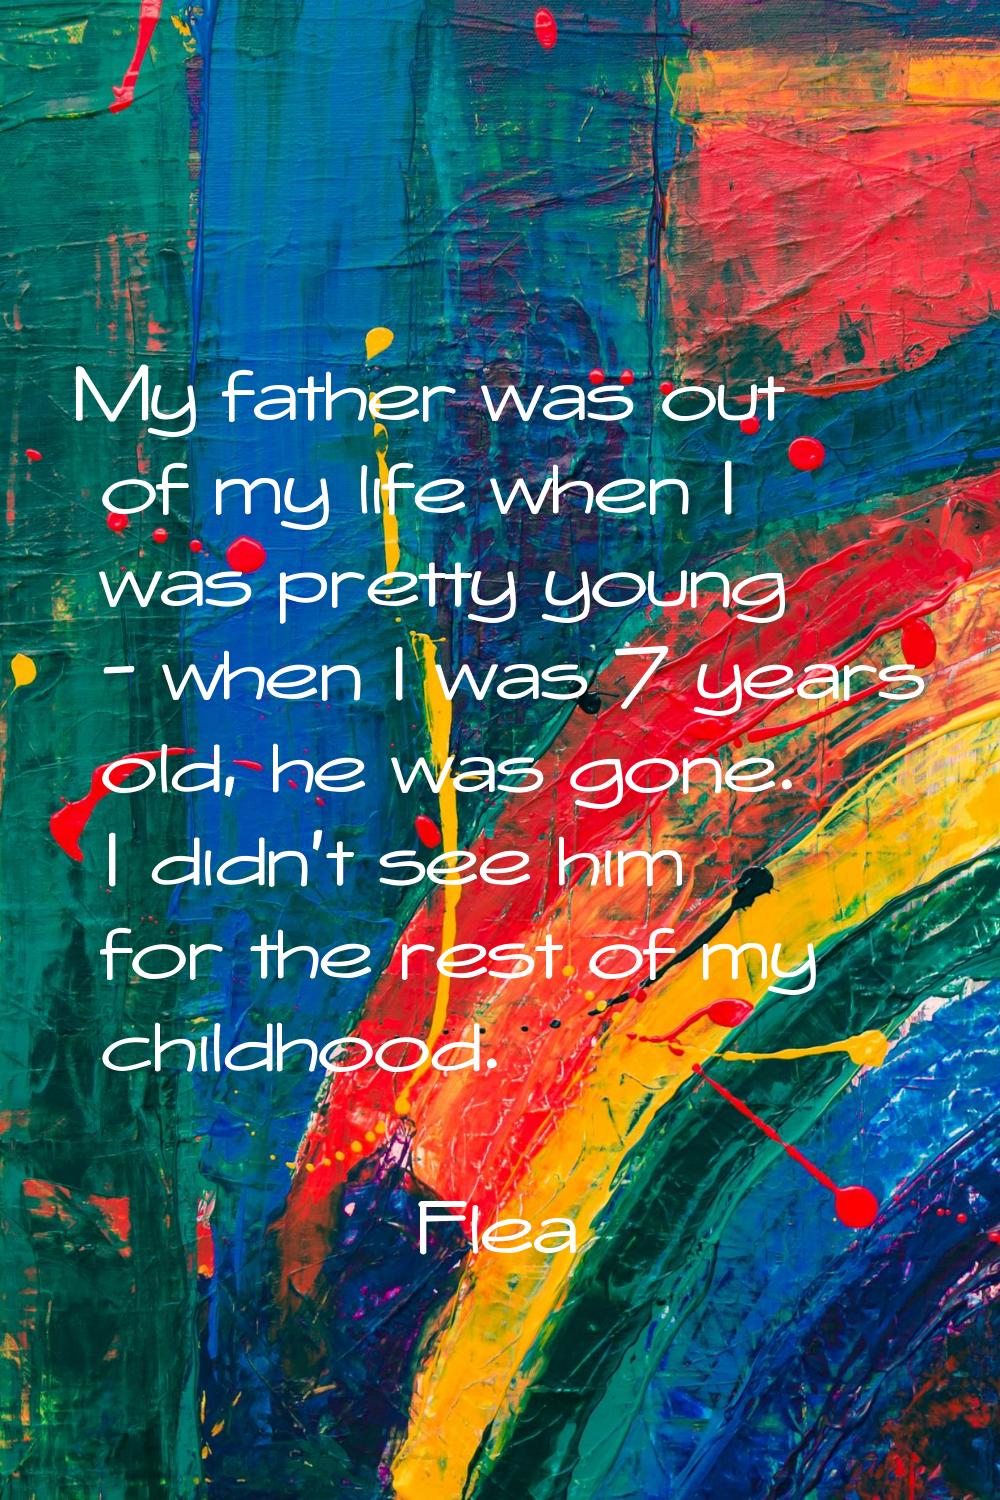 My father was out of my life when I was pretty young - when I was 7 years old, he was gone. I didn'